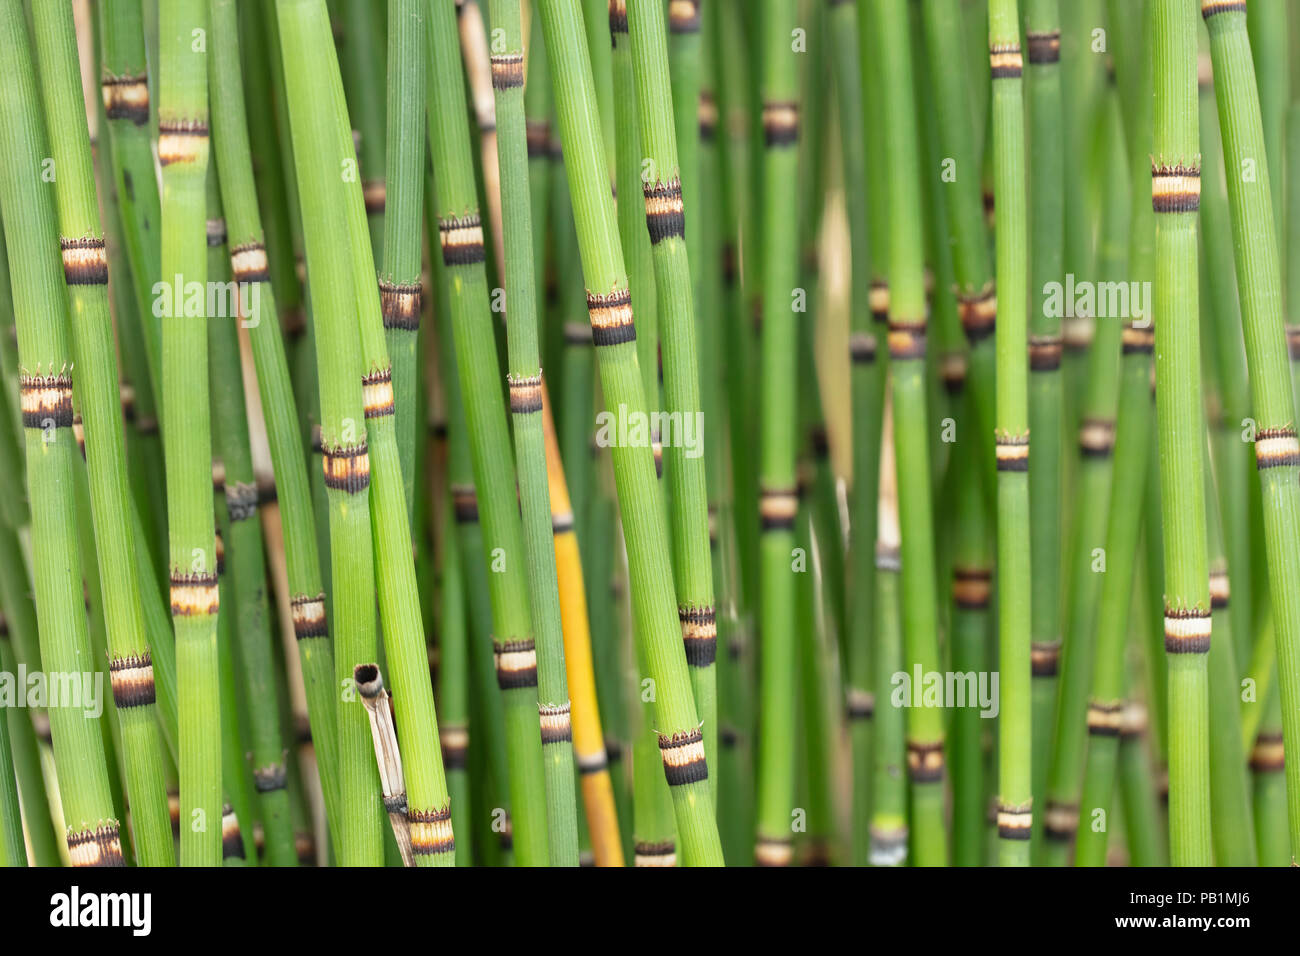 Bunch of clumping Japanese Horsetails growing in a garden Stock Photo